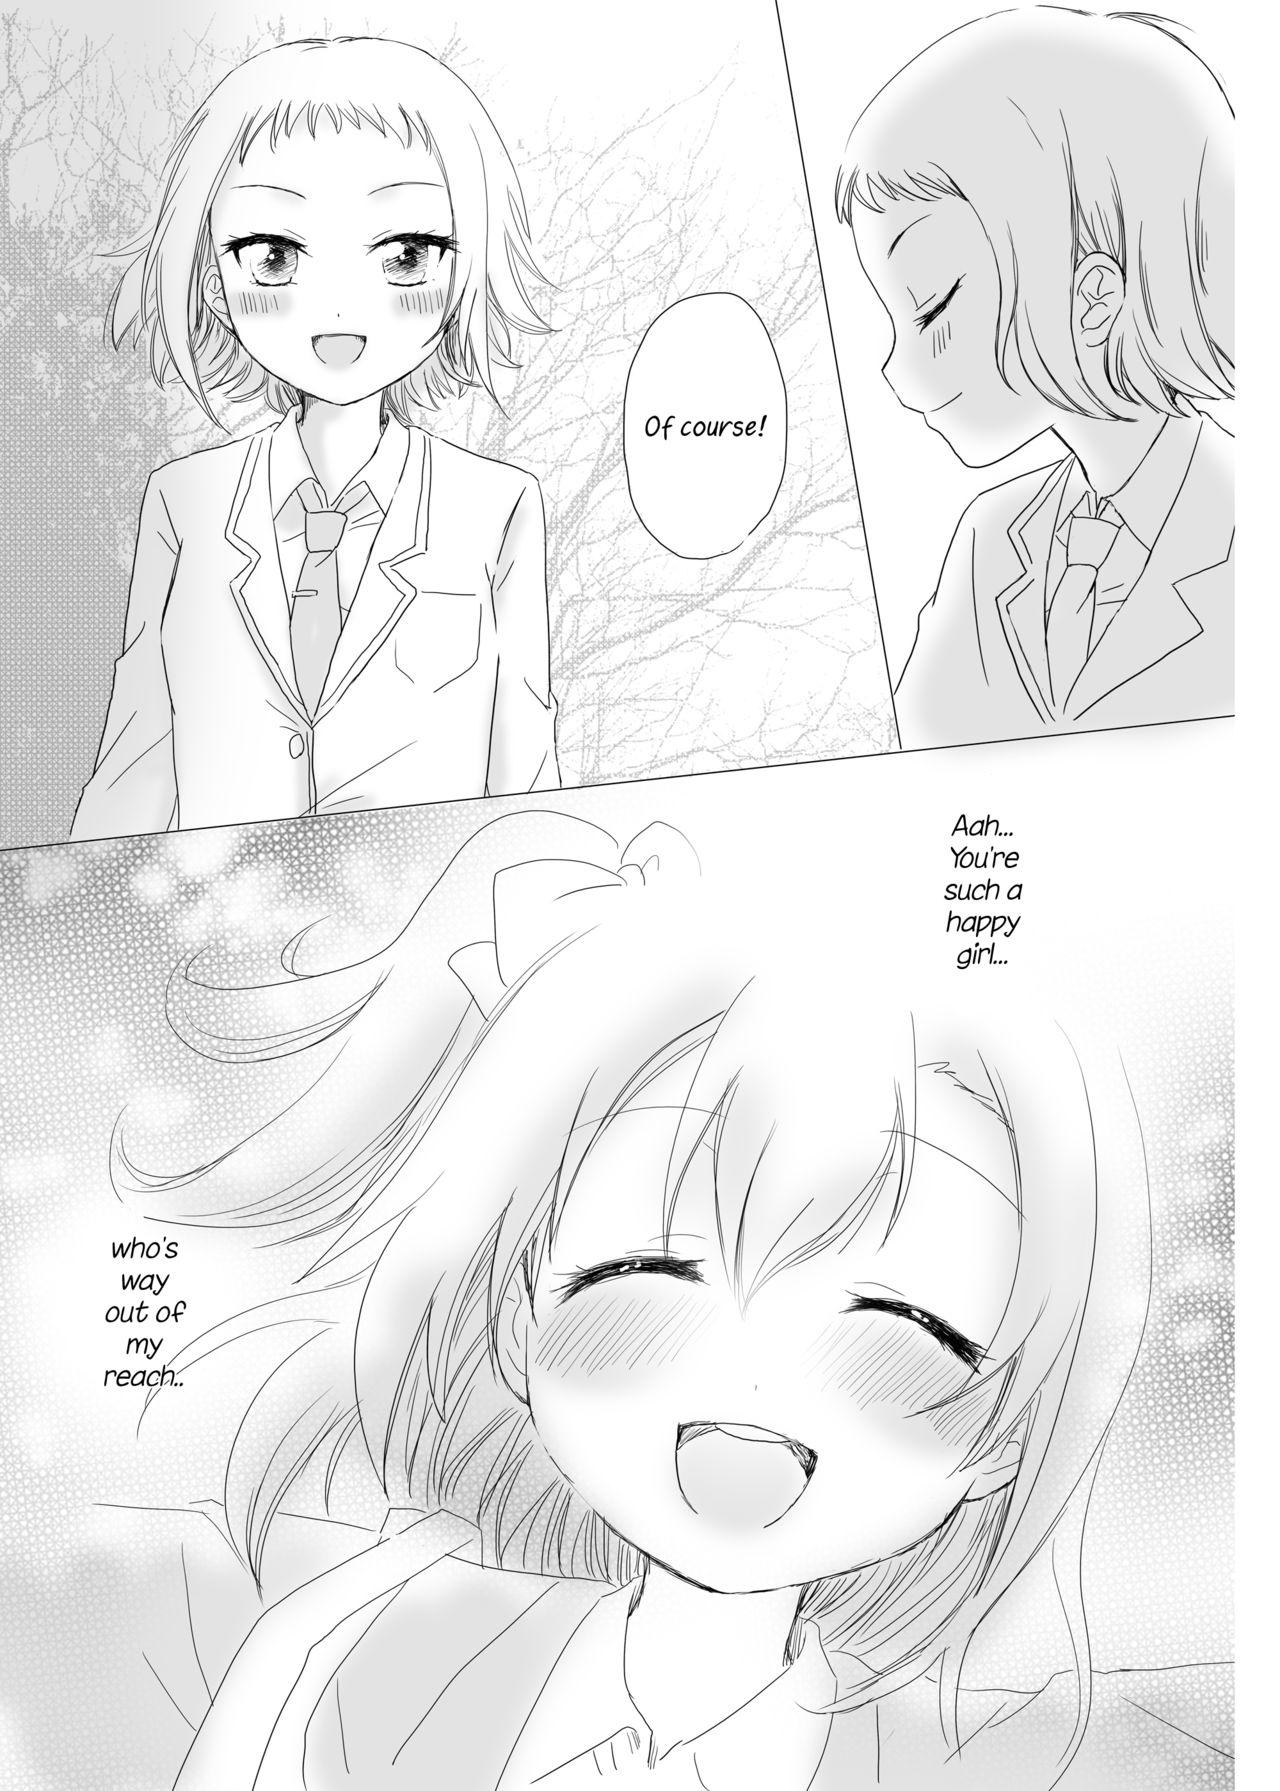 Anime What are you doing the rest of your life? - Love live Amateur Porn Free - Page 12